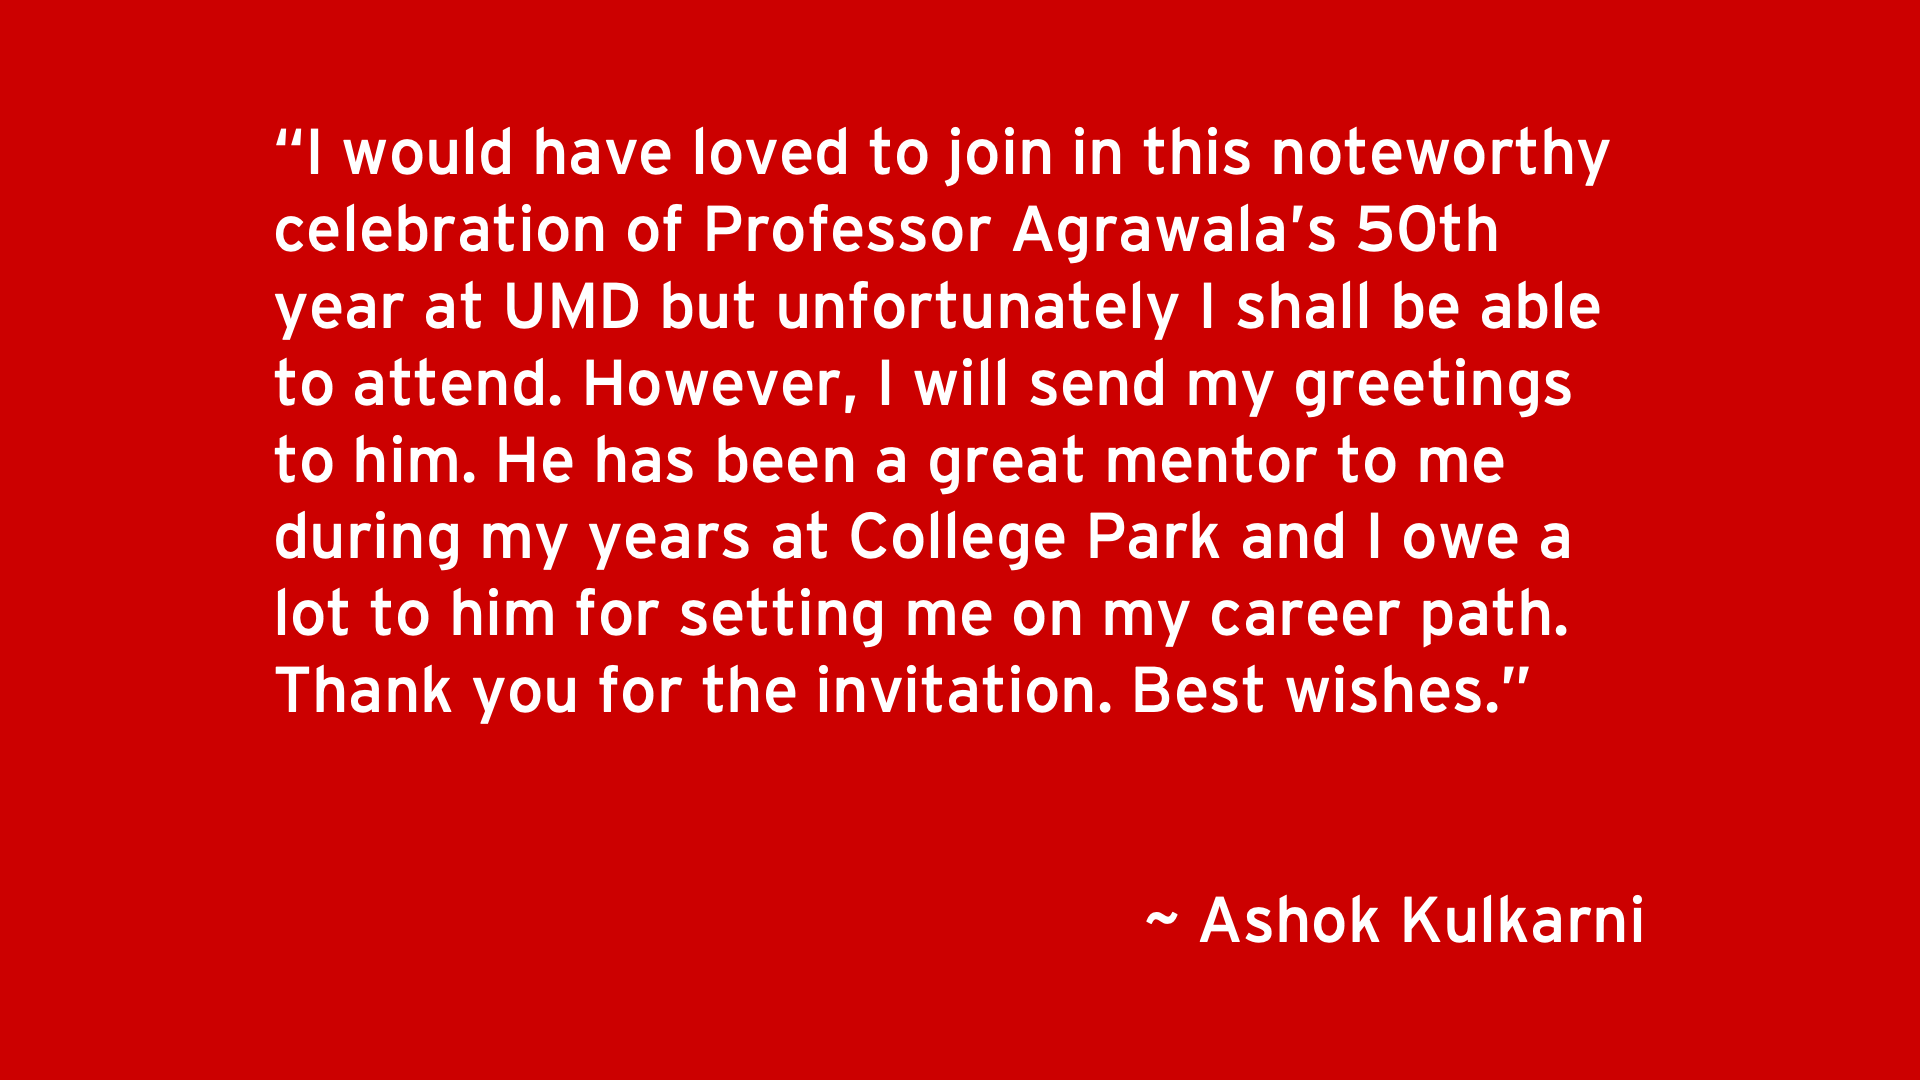 I would have loved to join in this noteworthy celebration of Professor Agrawala’s 50th year at UMD but unfortunately I shall be able to attend. However, I will send my greetings to him. He has been a great mentor to me during my years at College Park and I owe a lot to him for setting me on my career path. Thank you for the invitation. Best wishes. - Ashok Kulkarni